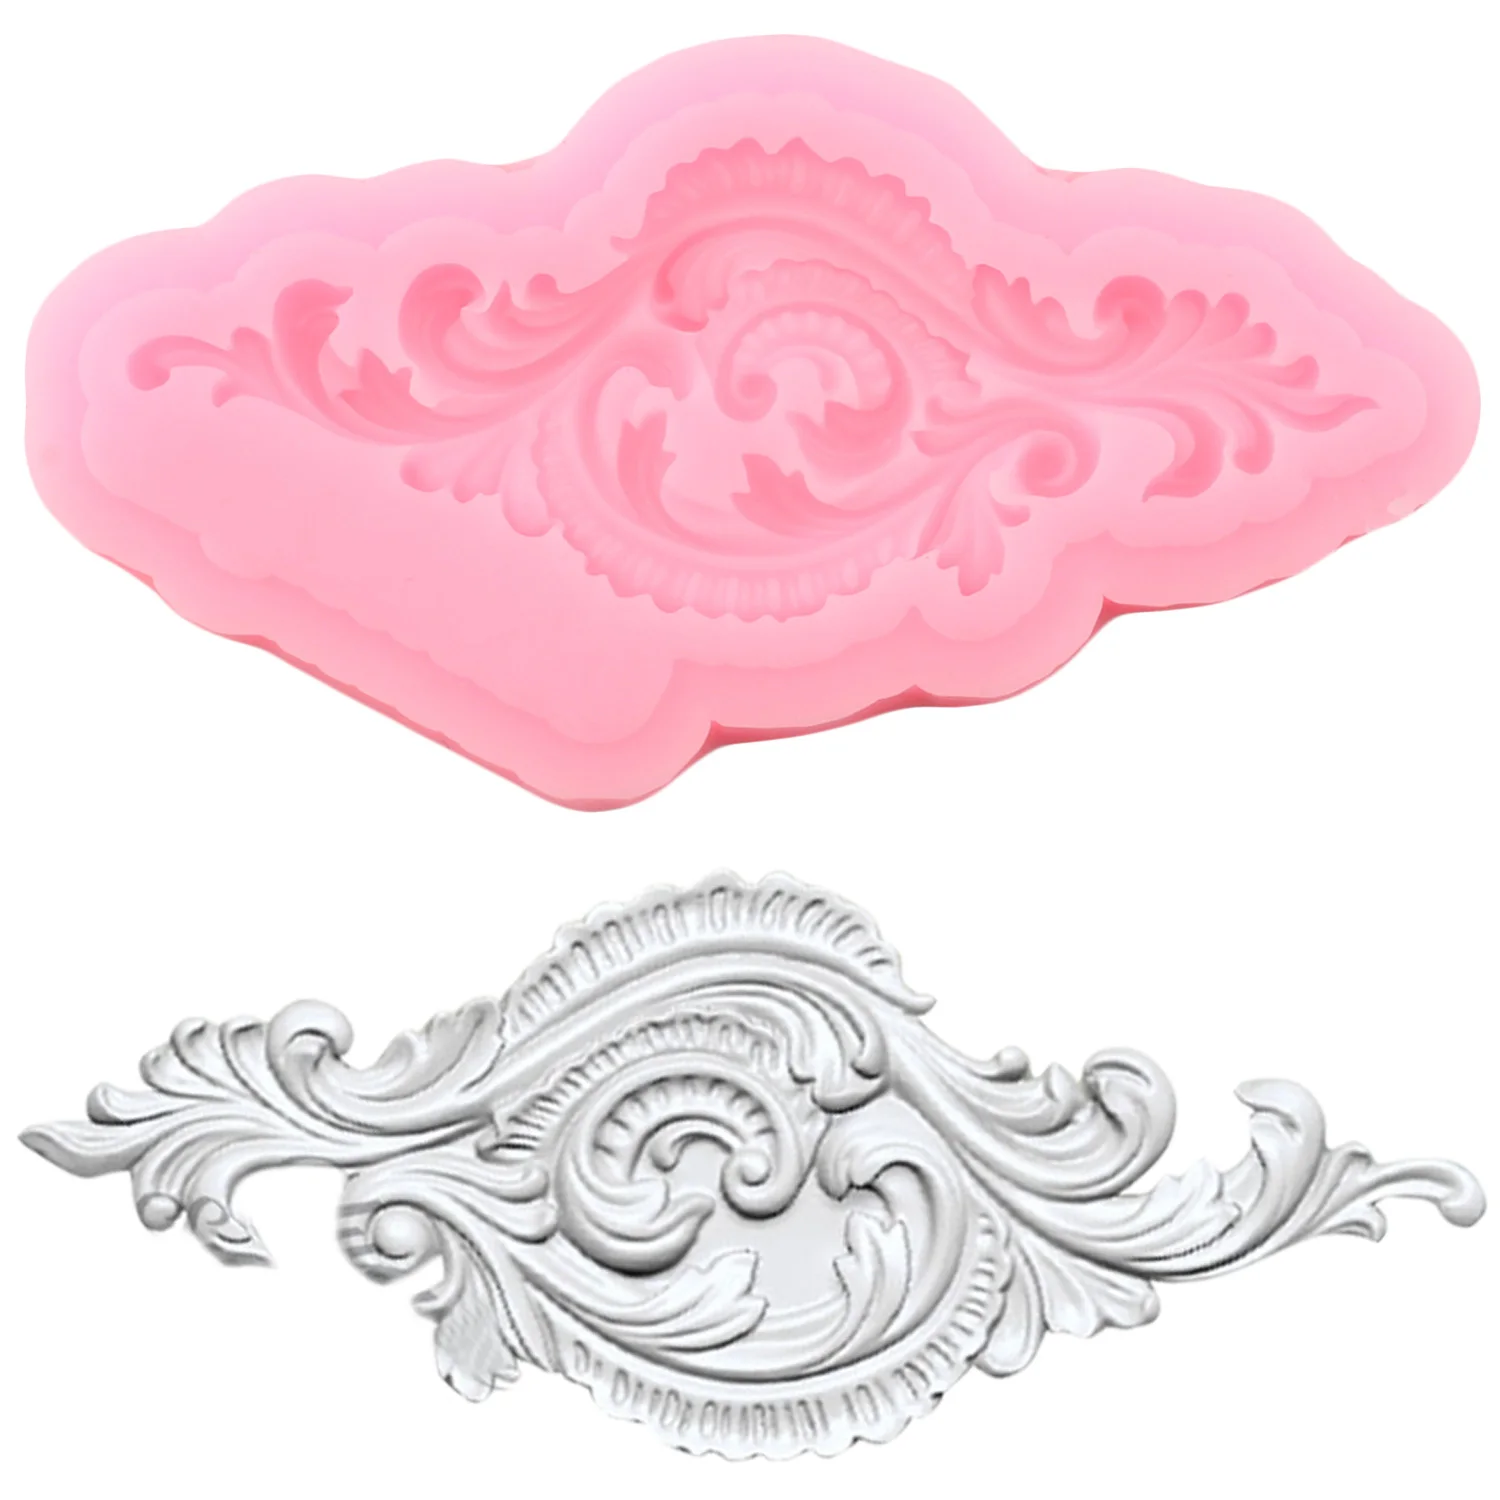 

DIY Sugarcraft Border Silicone Mold Scroll Relief Cupcake Topper Fondant Cake Decorating Tools Candy Chocolate Gumpaste Moulds